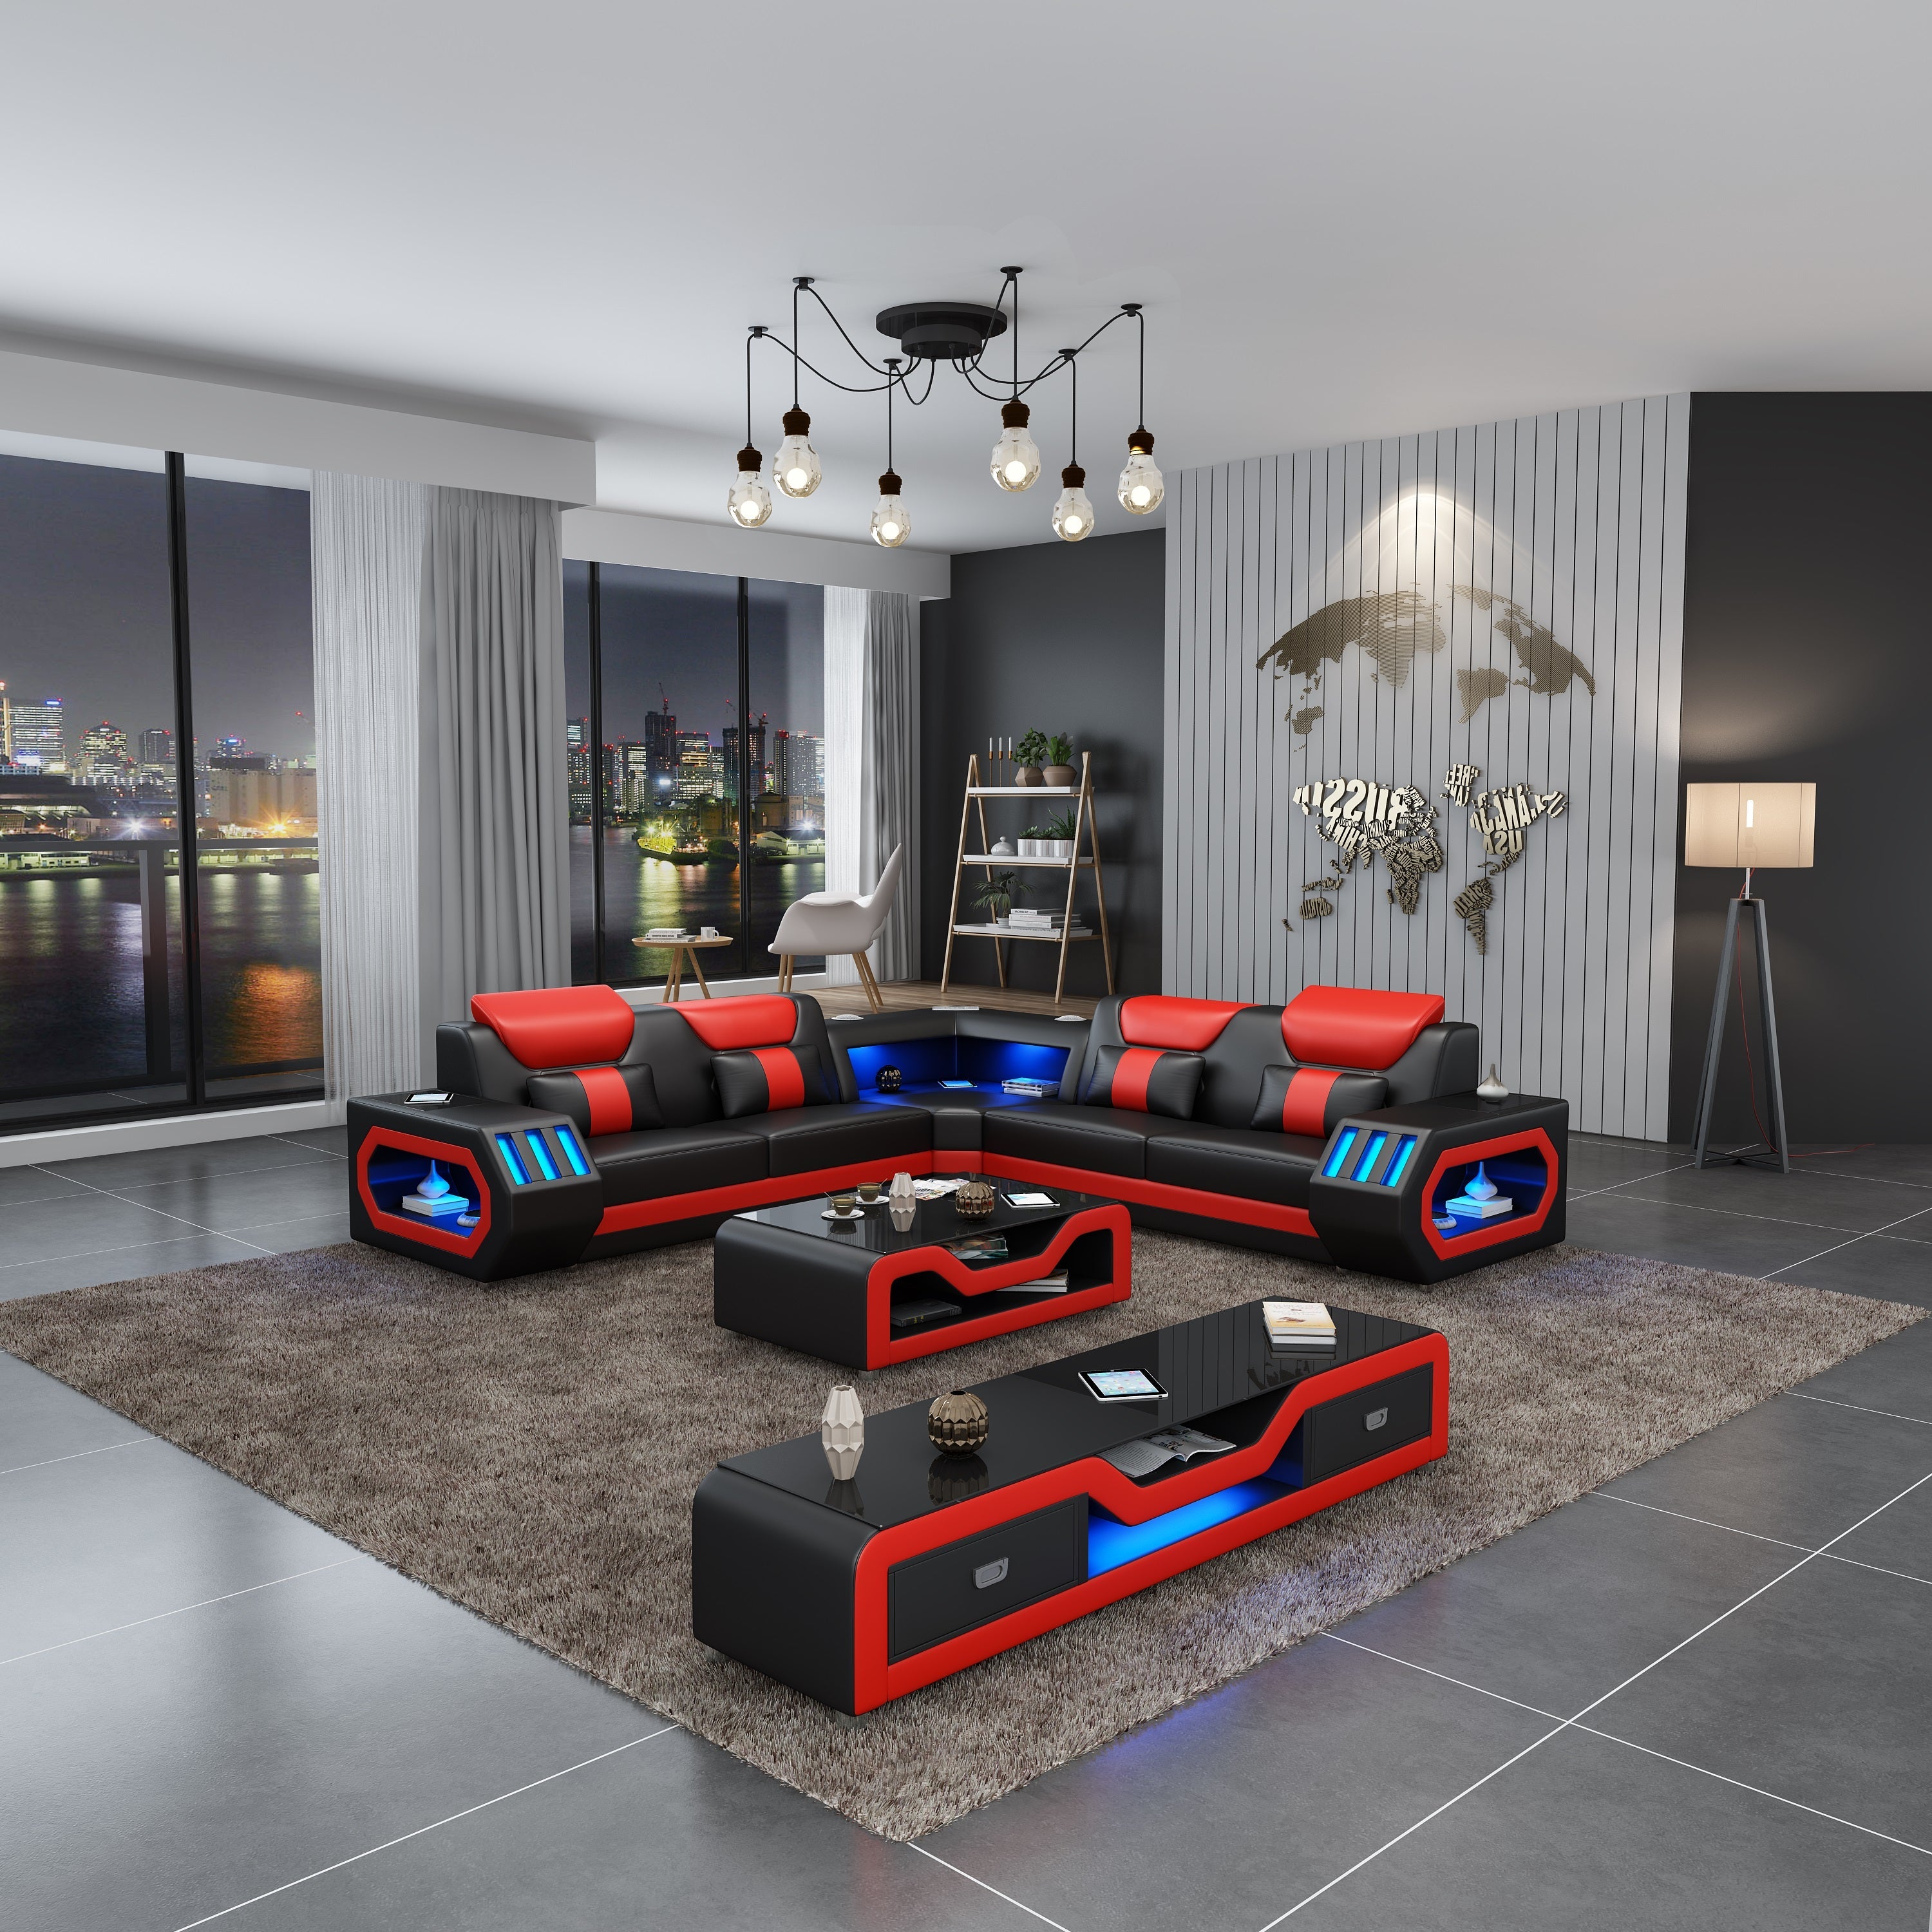 European Furniture - Spaceship LED Sectional Black Red Italian Leather - LED-86661-BR - New Star Living